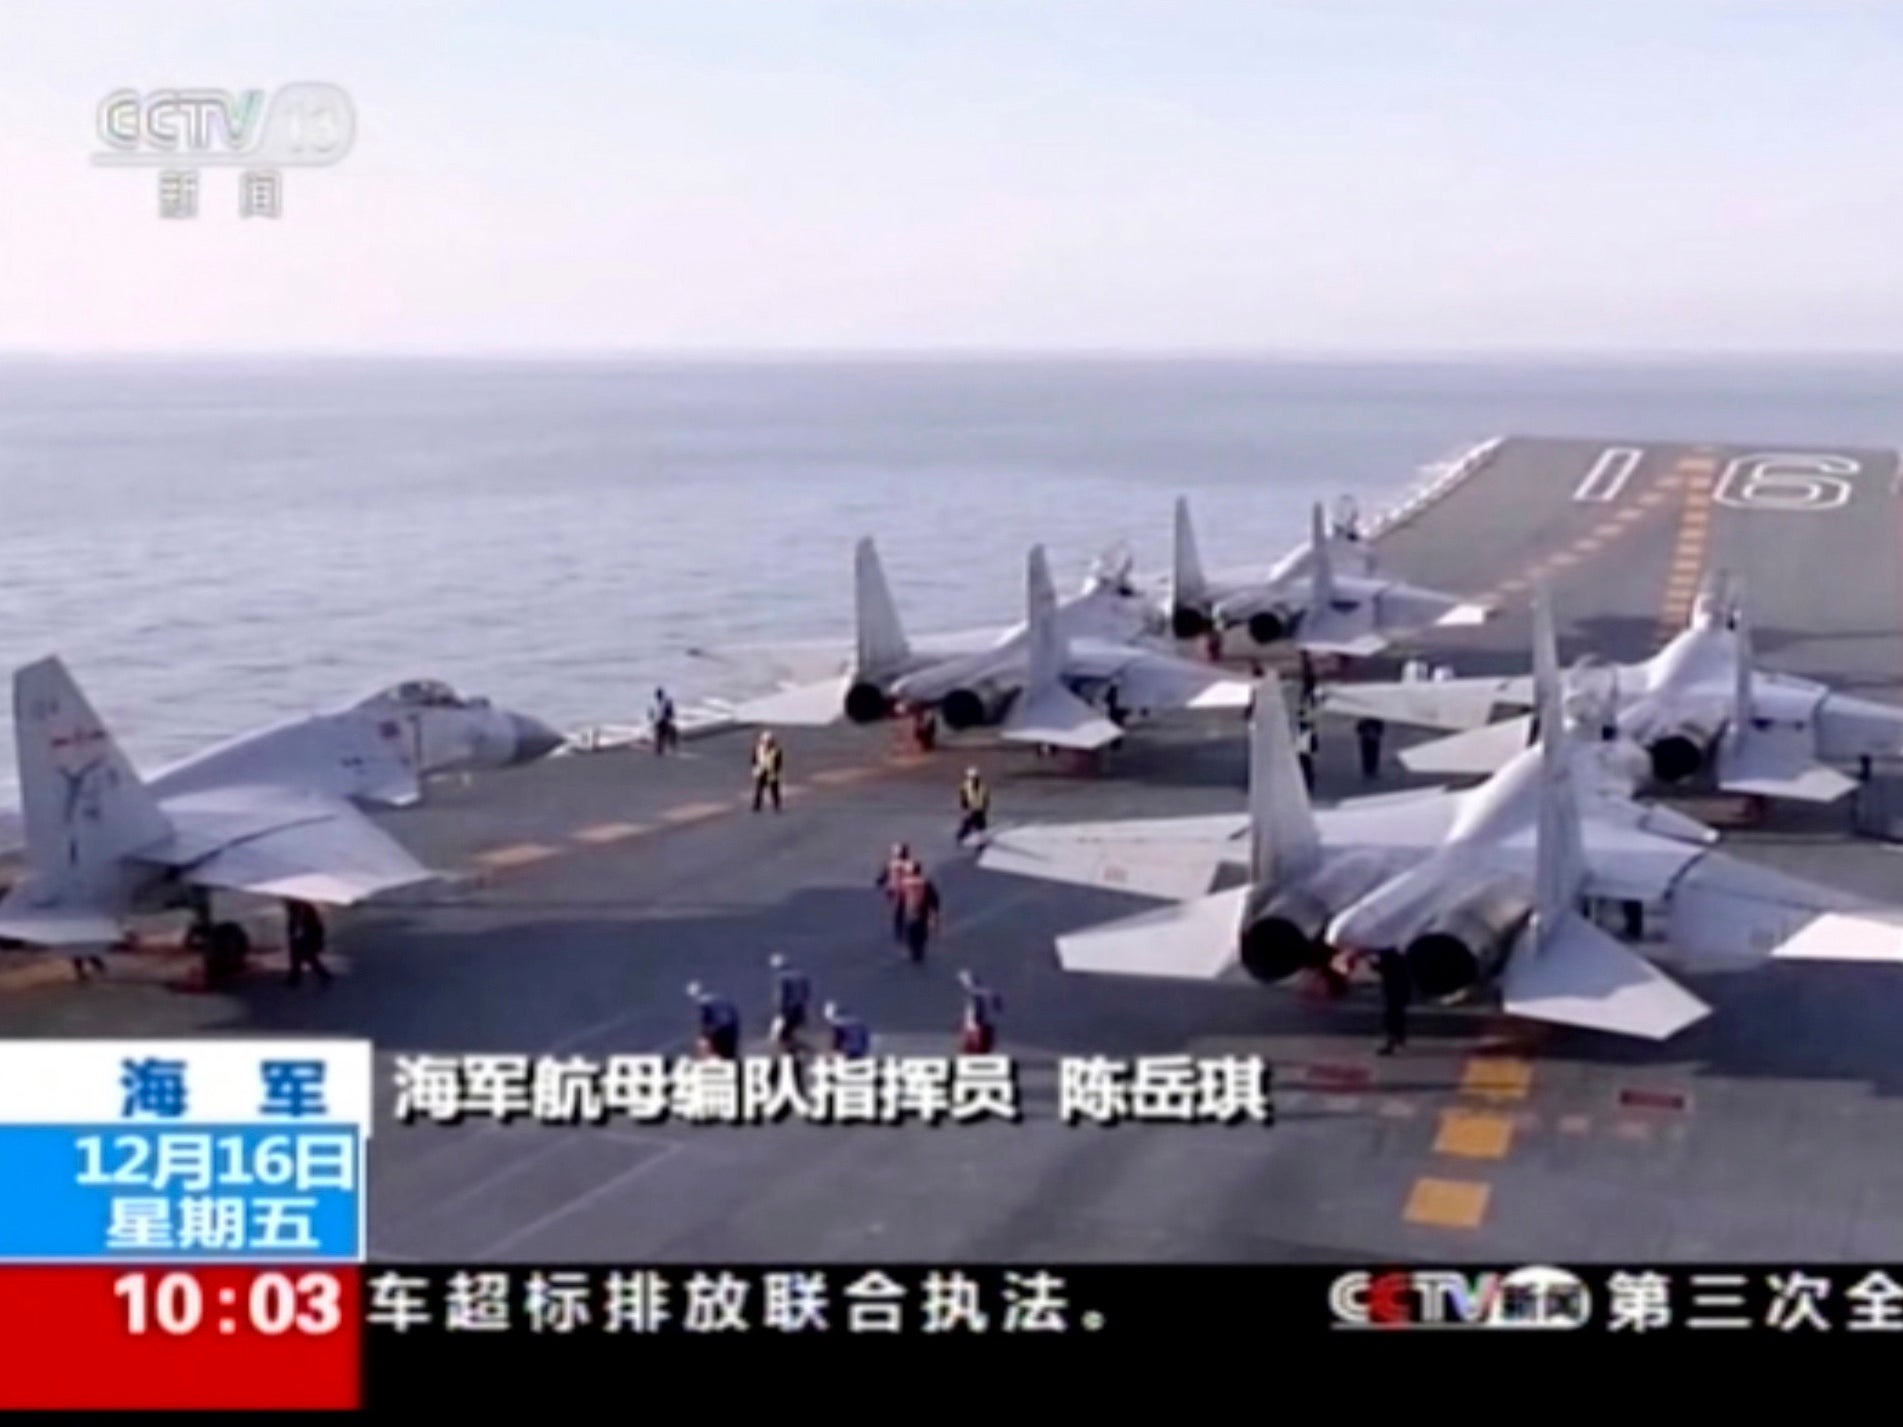 China has for the first time broadcast footage of the Liaoning carrier's drills